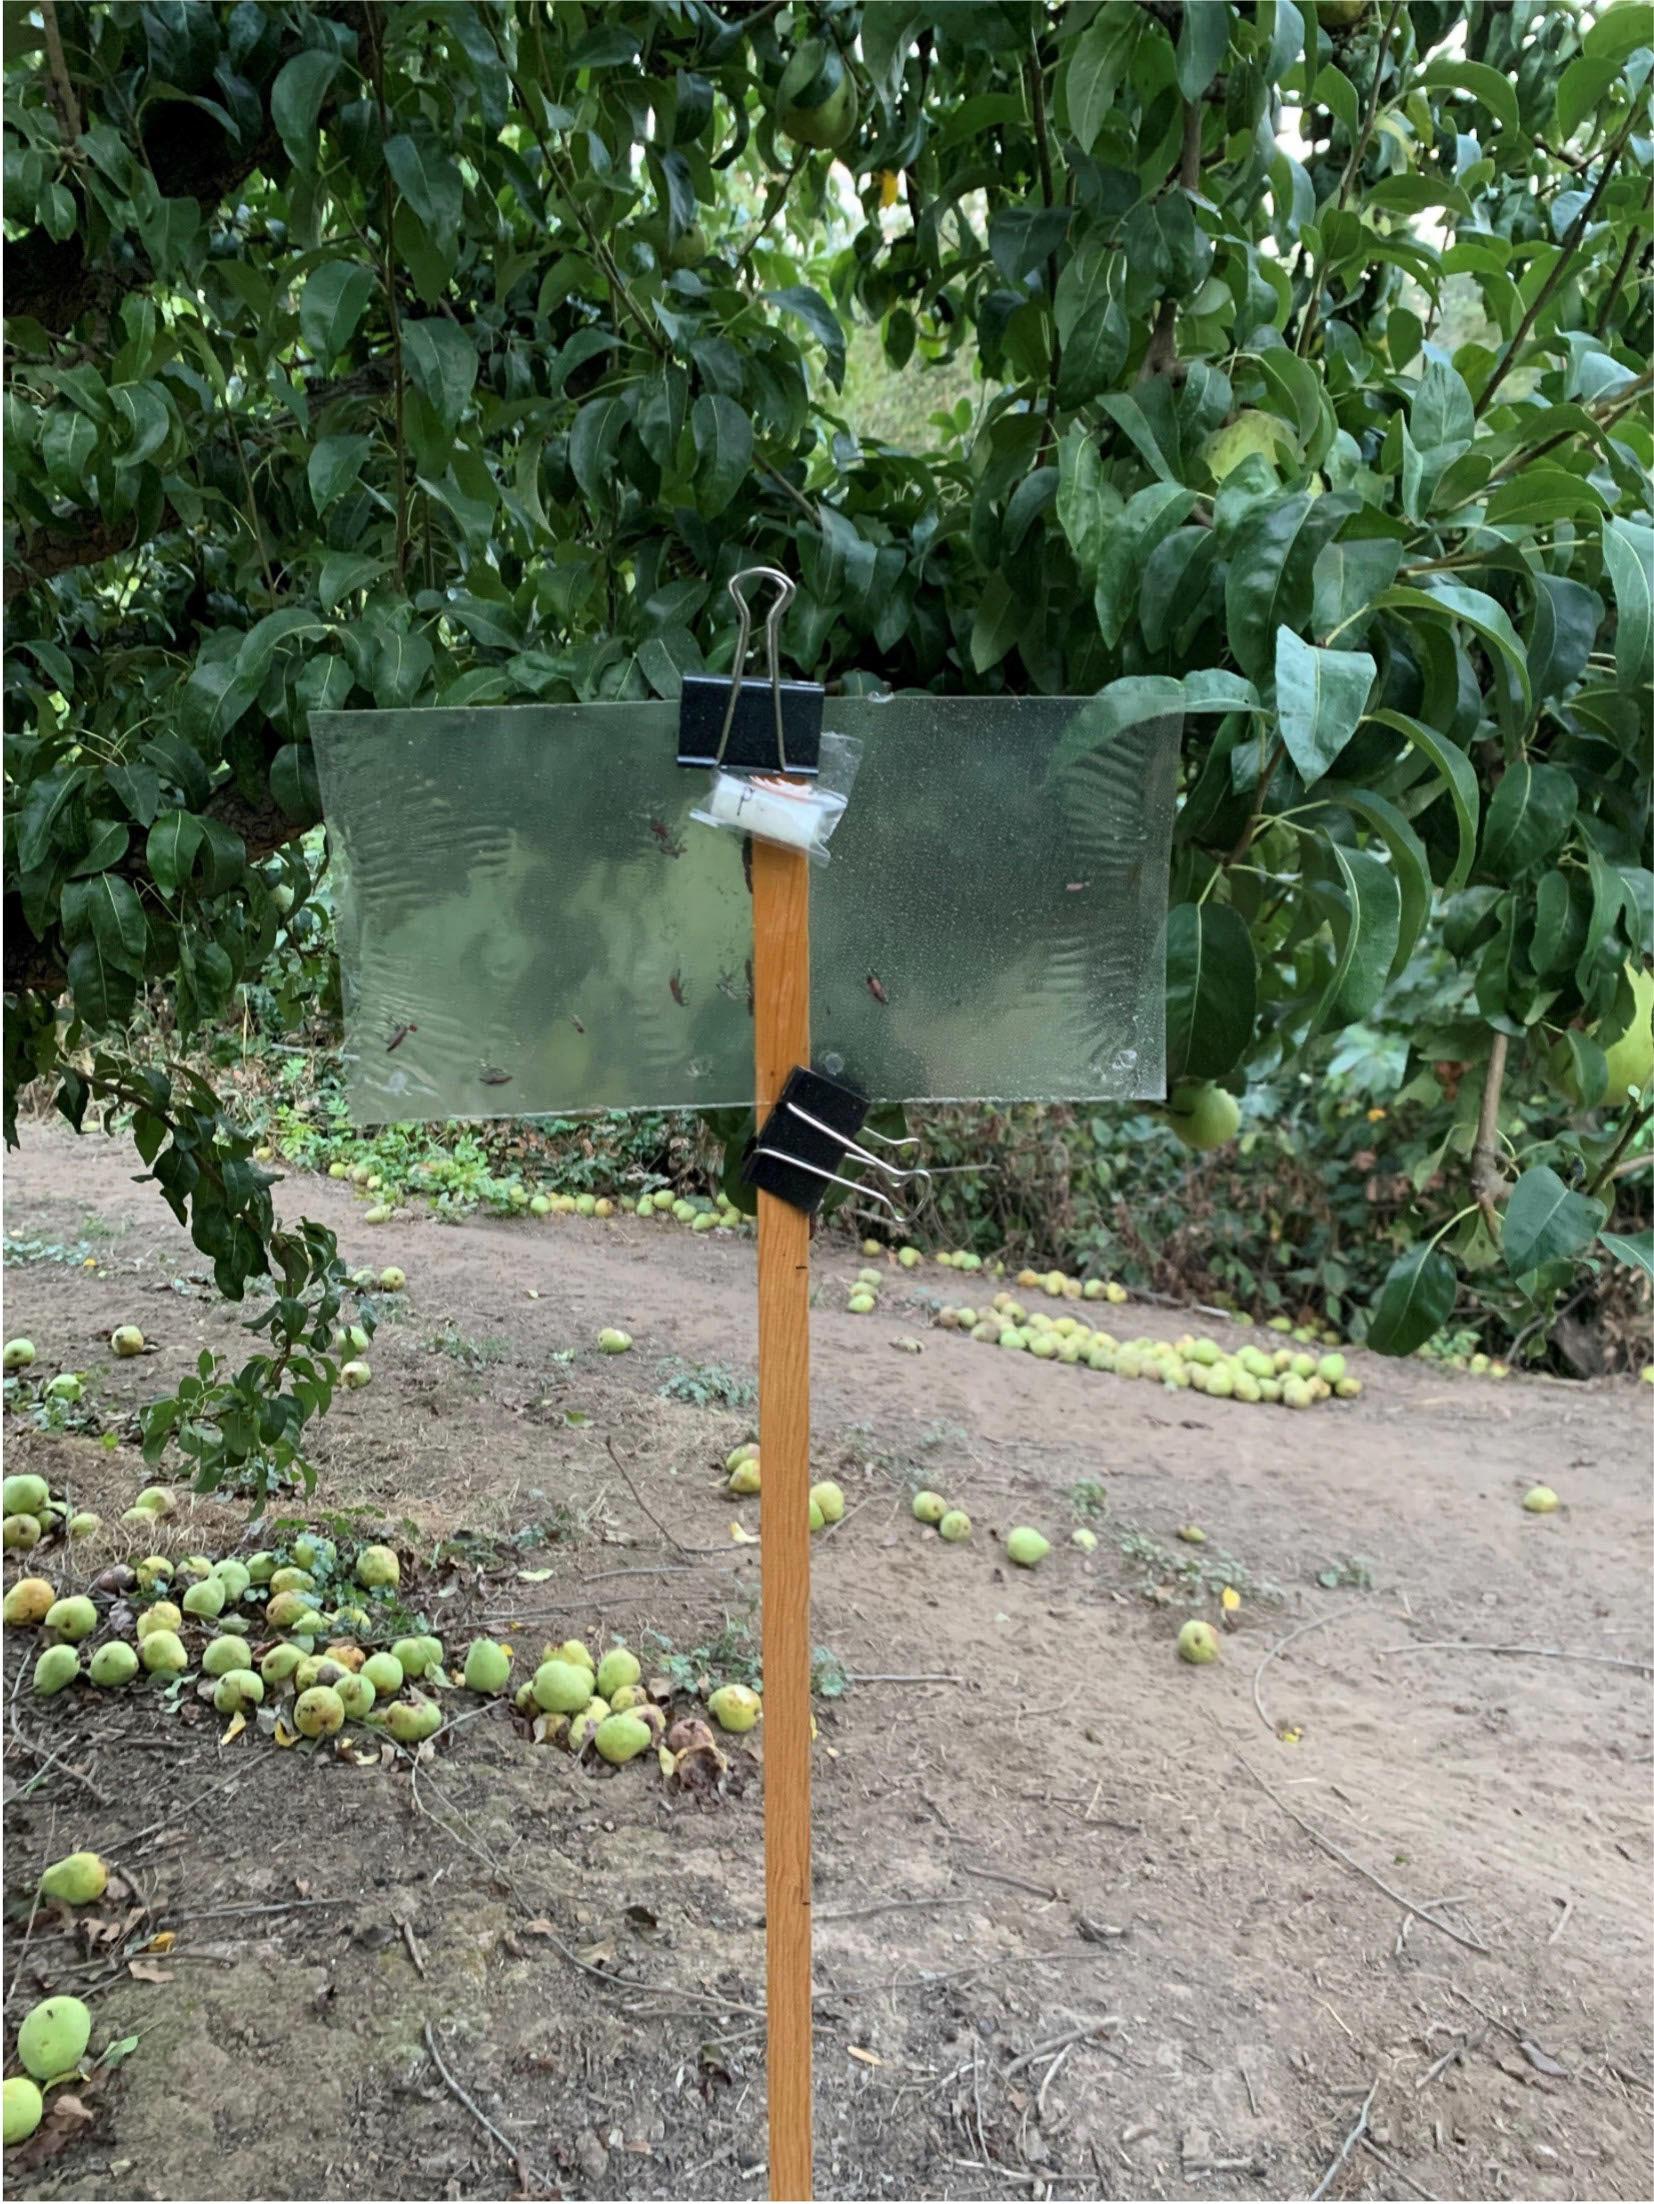 pears litter the ground in an orchard where a stake holds a rectangular sticky trap